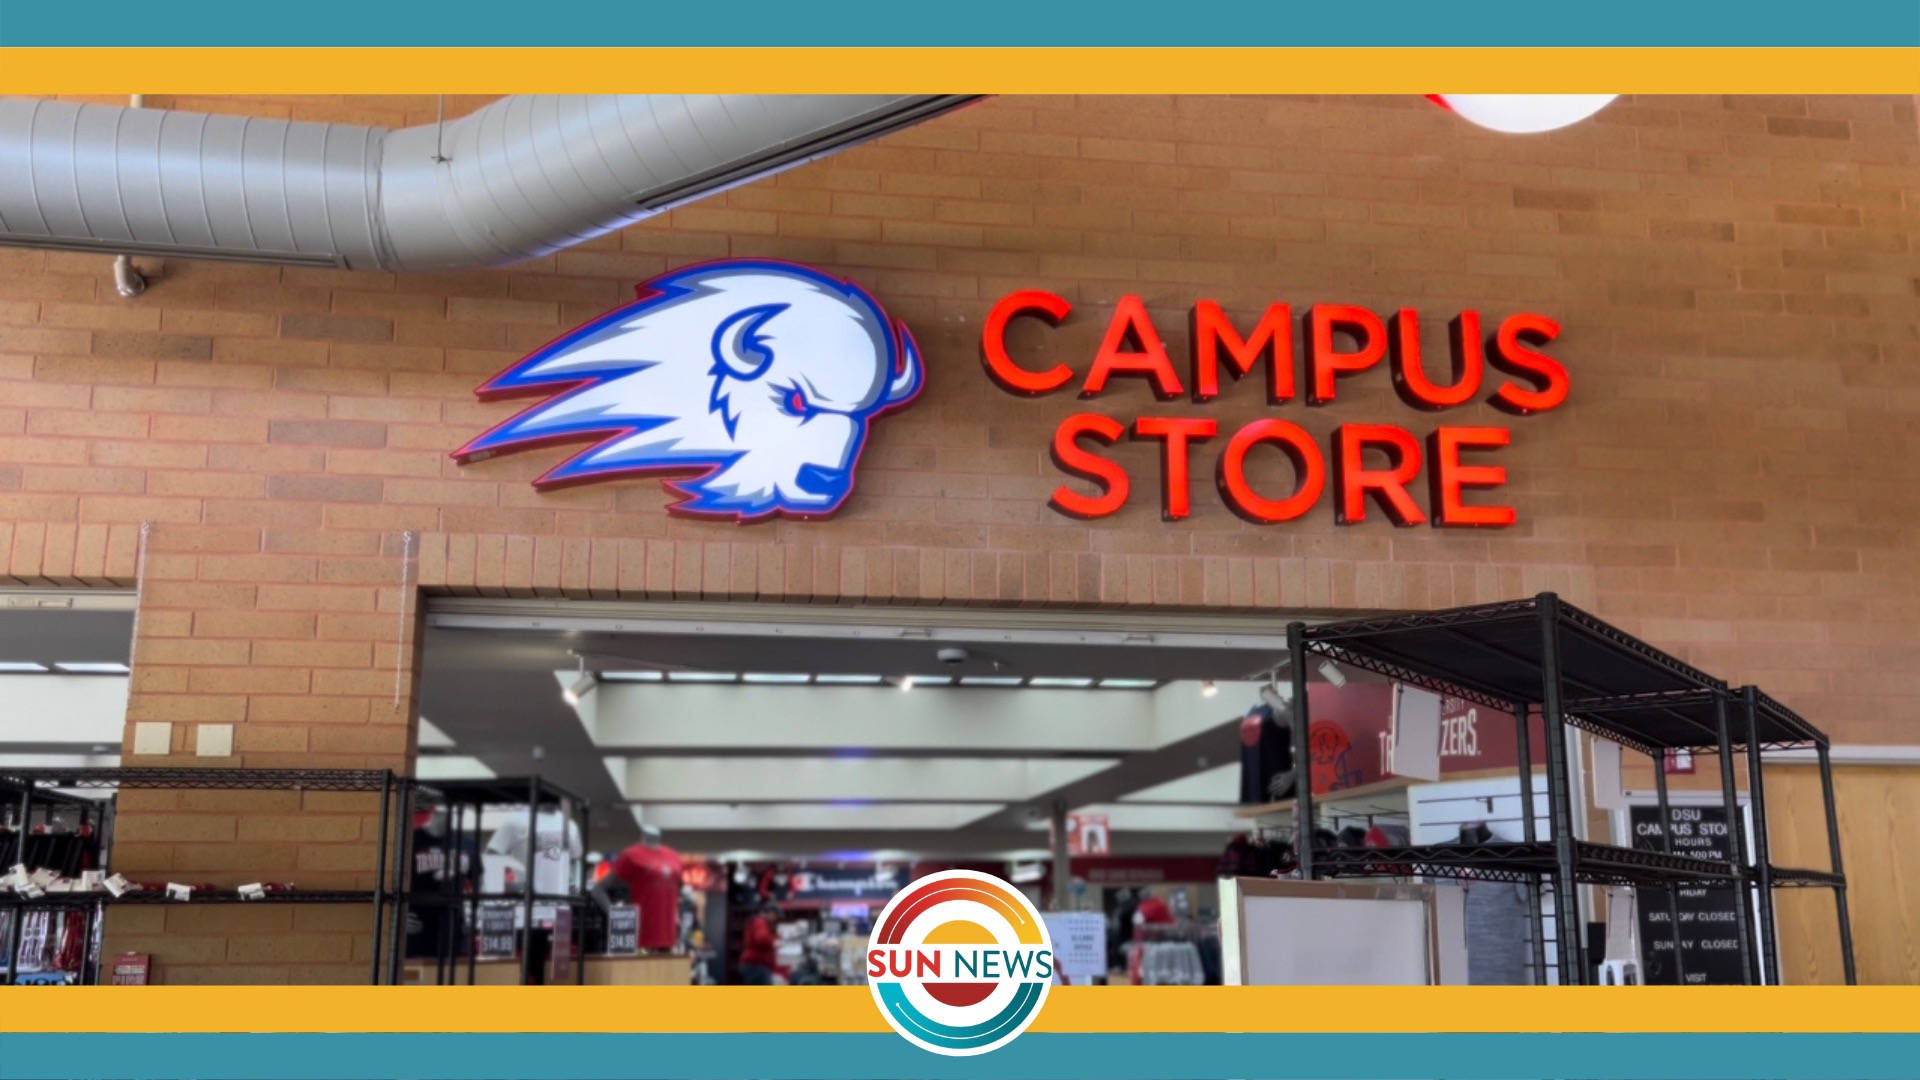 Best and worst items in the campus store